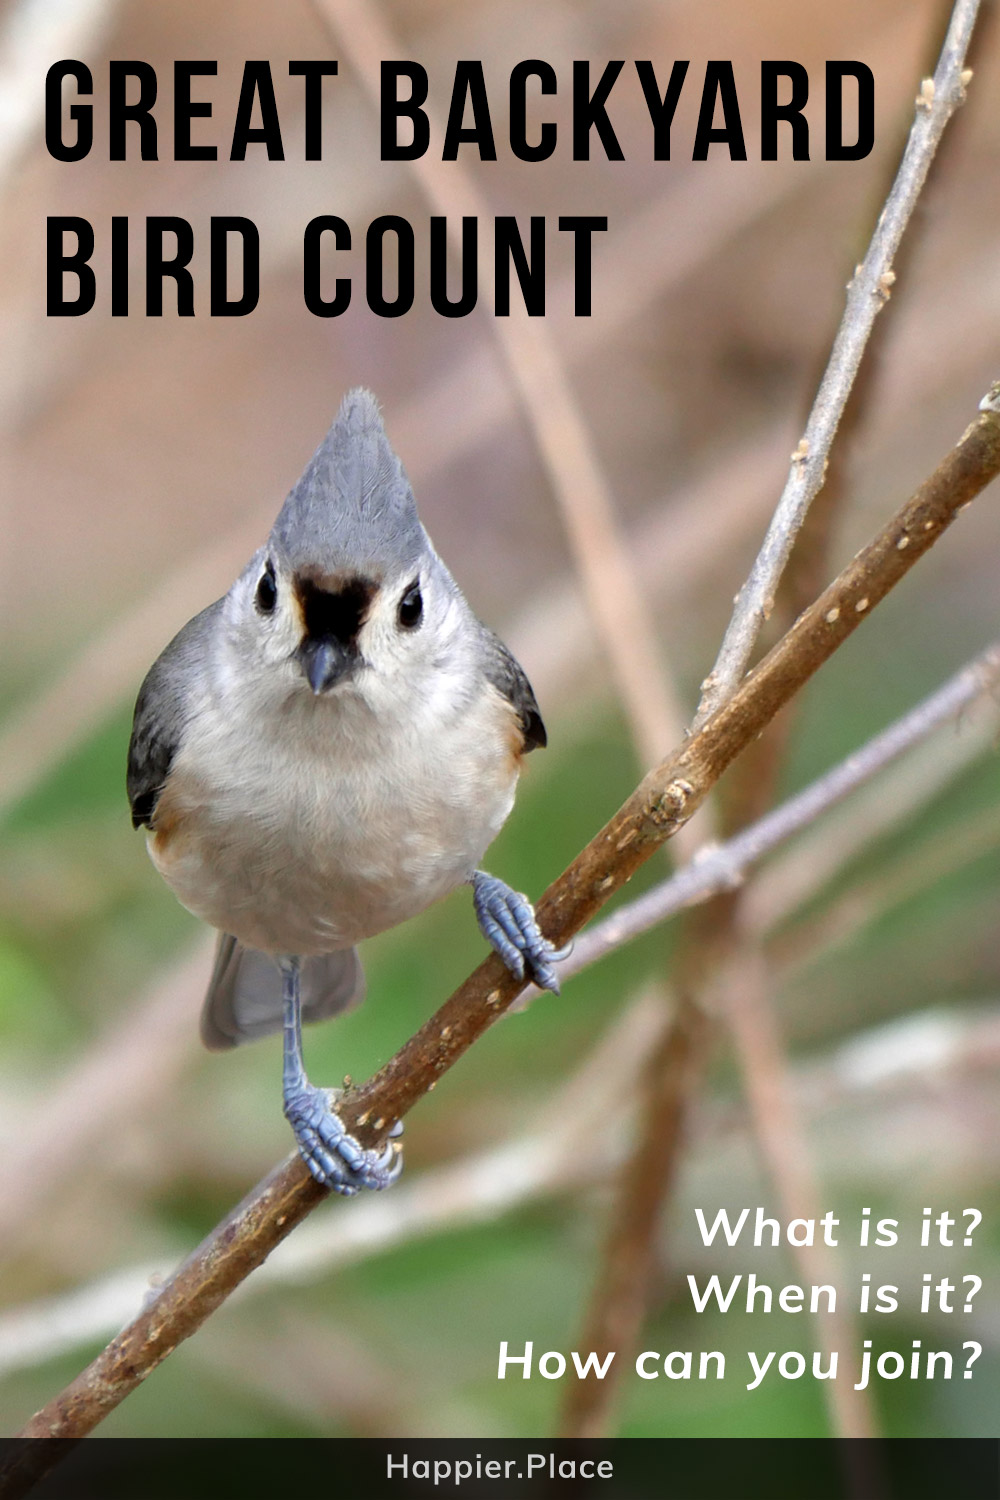 Tufted Titmouse representing the Ultimate Guide to the Great Backyard Bird Count and how to participate and win. What is it? When does it take place? How can you join the fun?